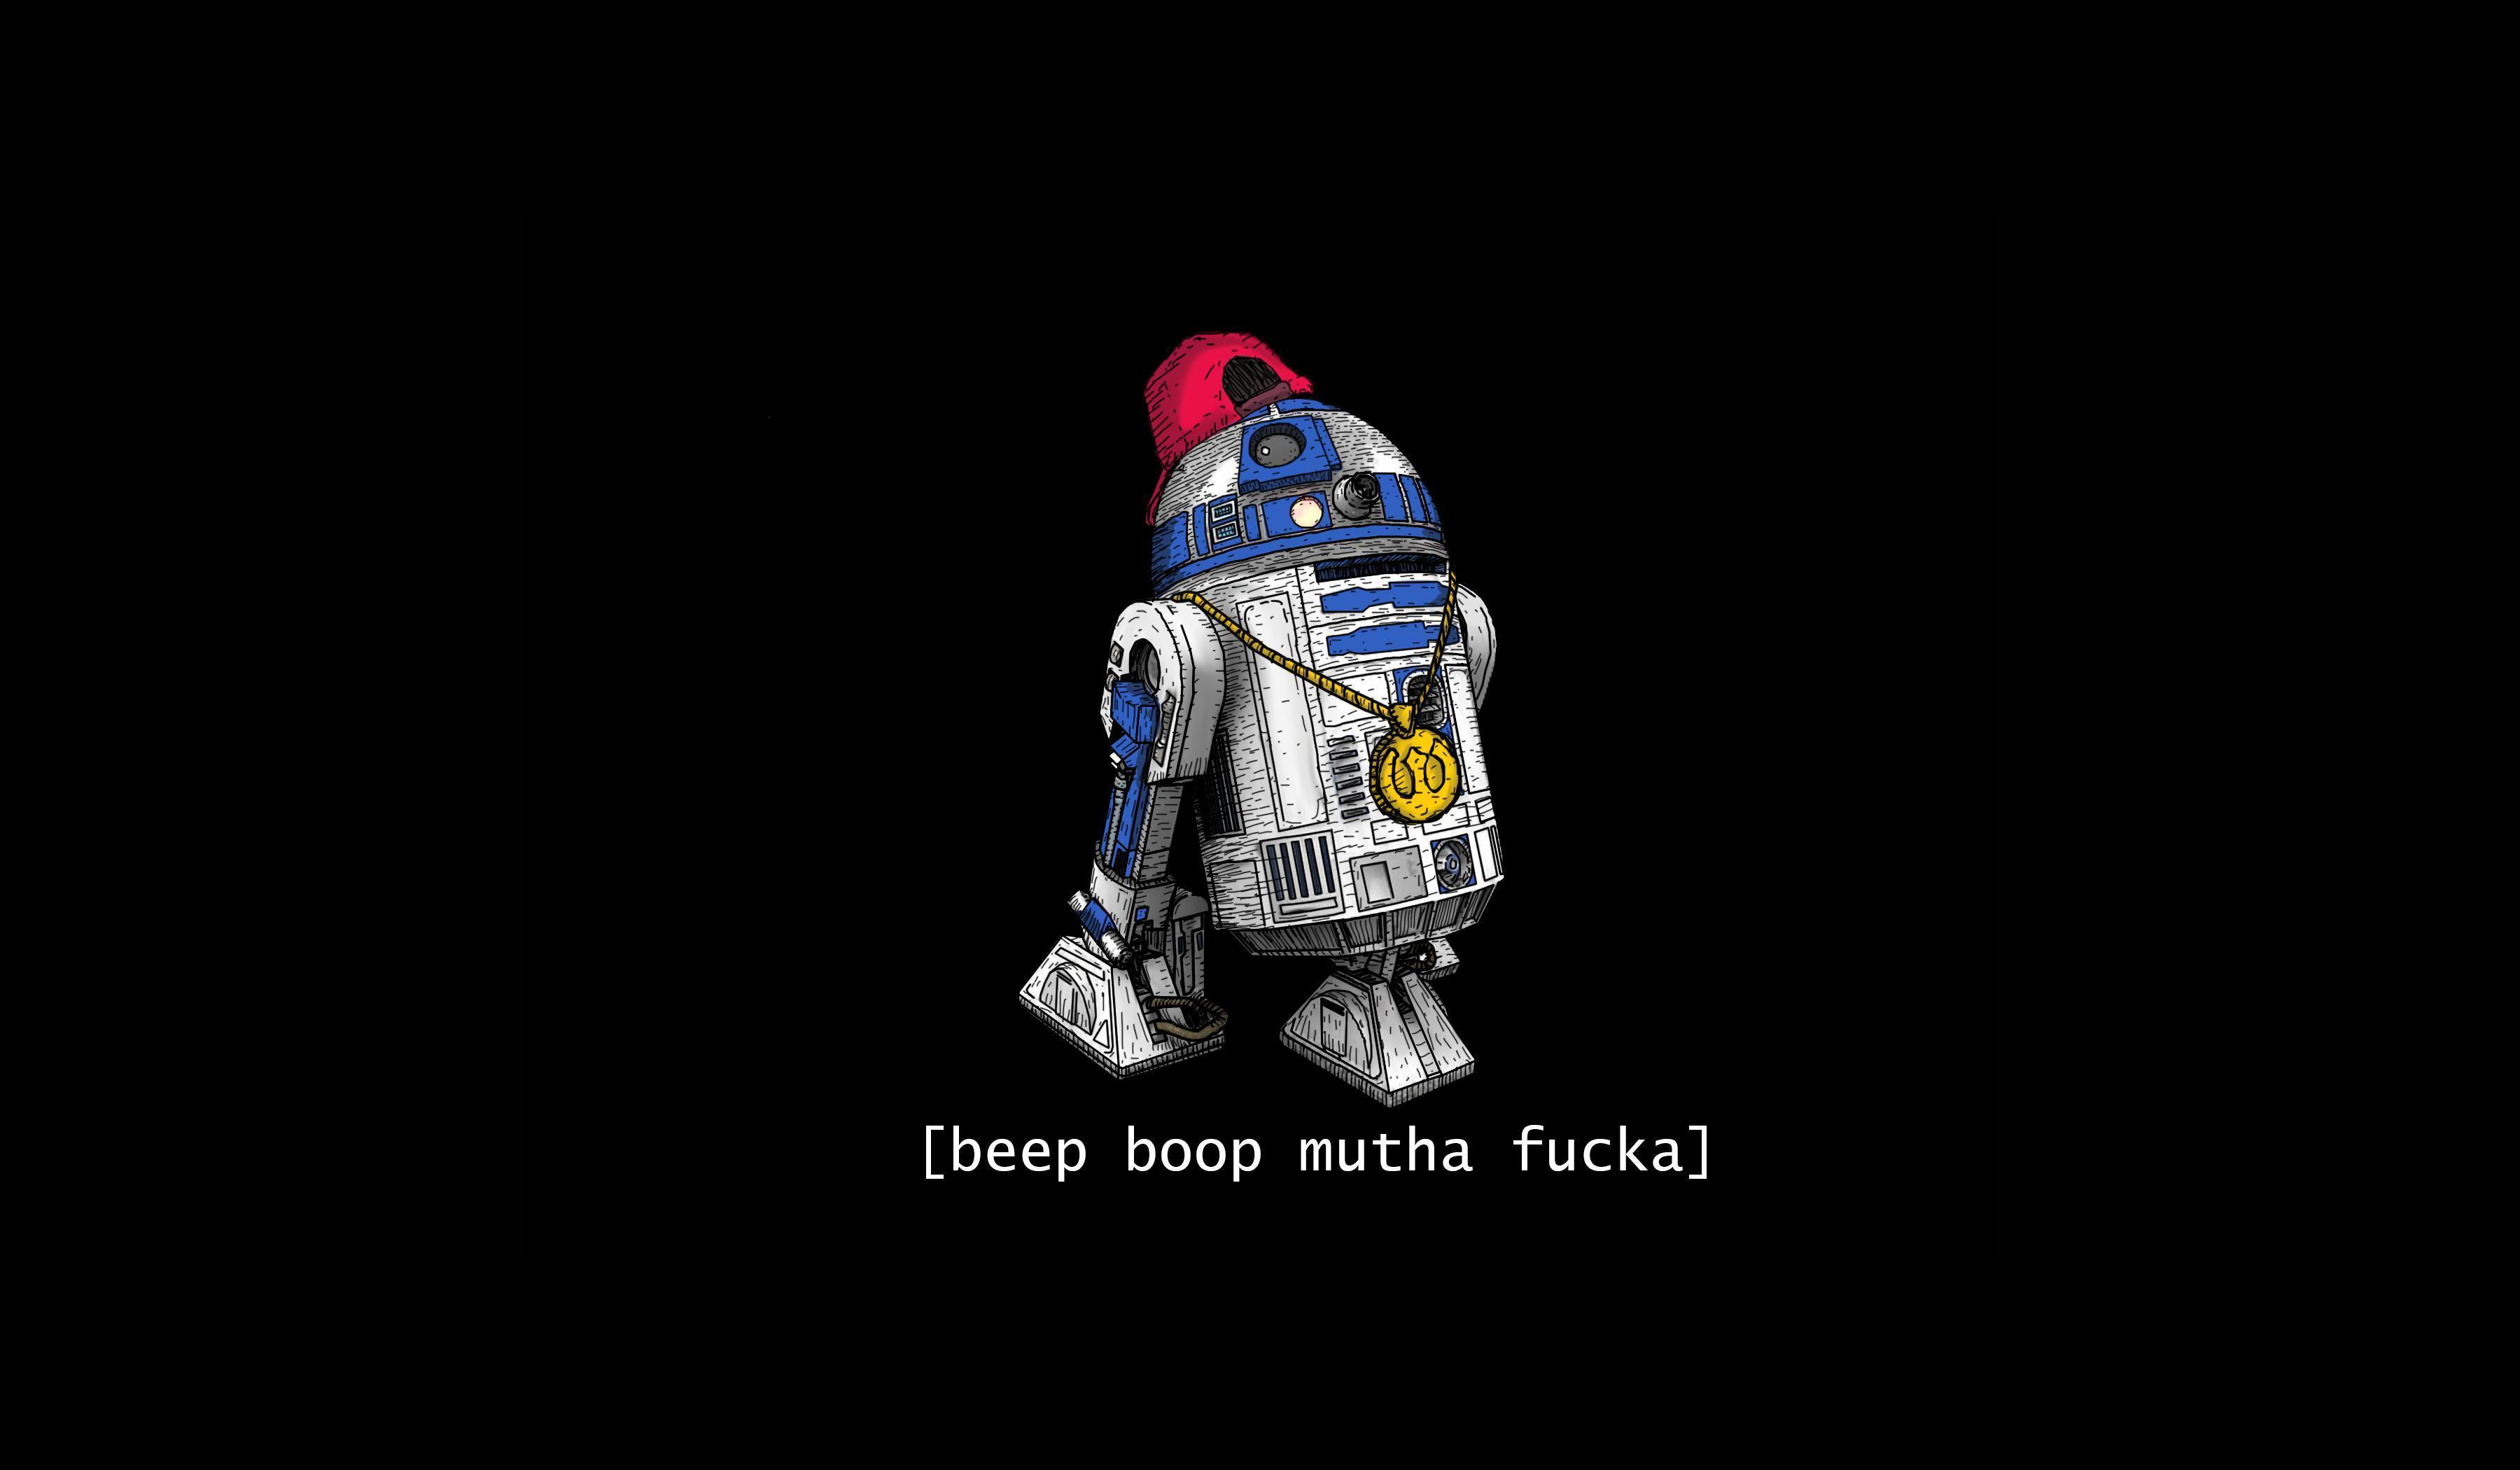 GFC81: R2D2 Wallpaper in Best Resolutions, High Quality